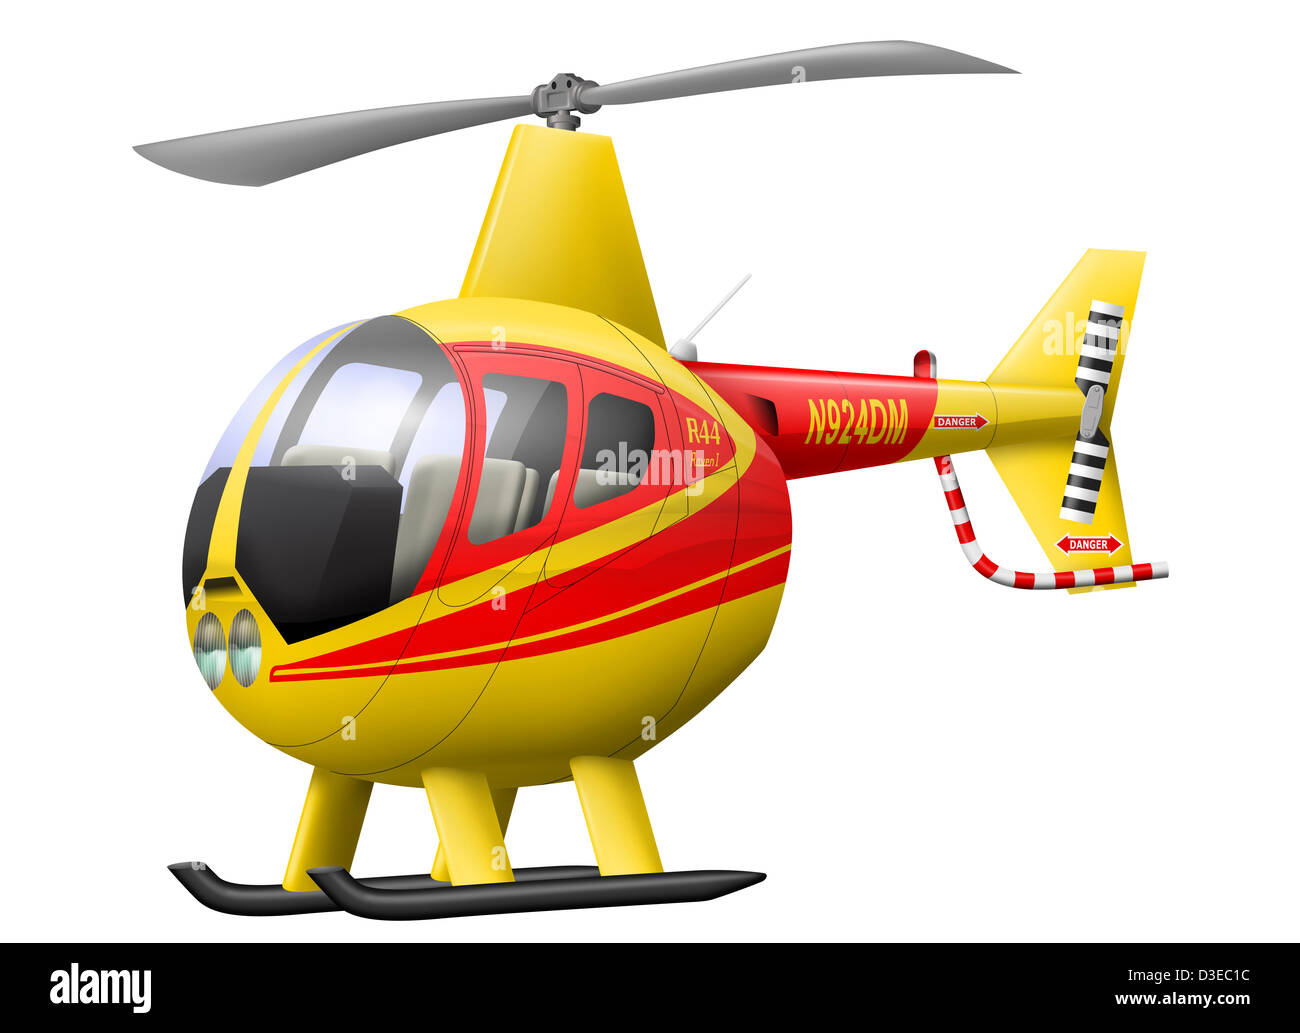 Cartoon illustration of a Robinson R44 Raven helicopter. Stock Photo